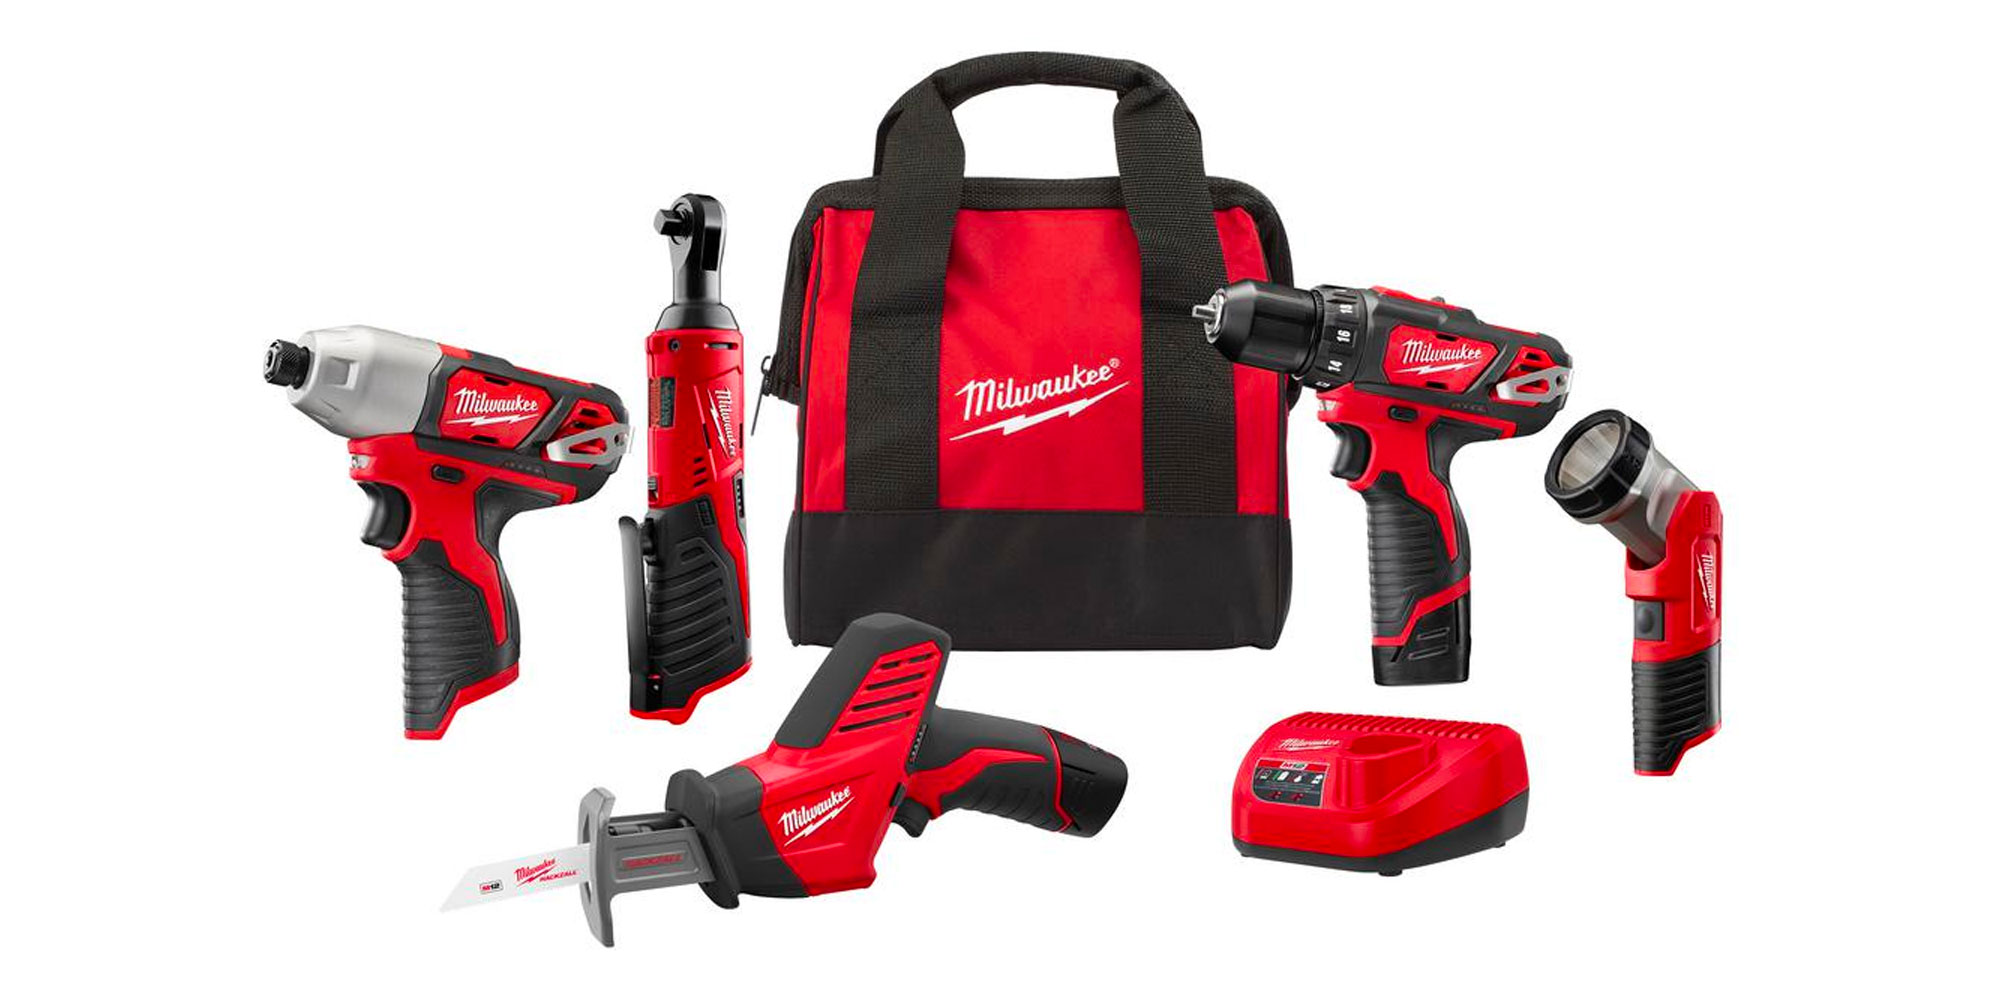 Milwaukees 5 Tool Combo Kit Is A Diyer Must Have At 199 Reg 349